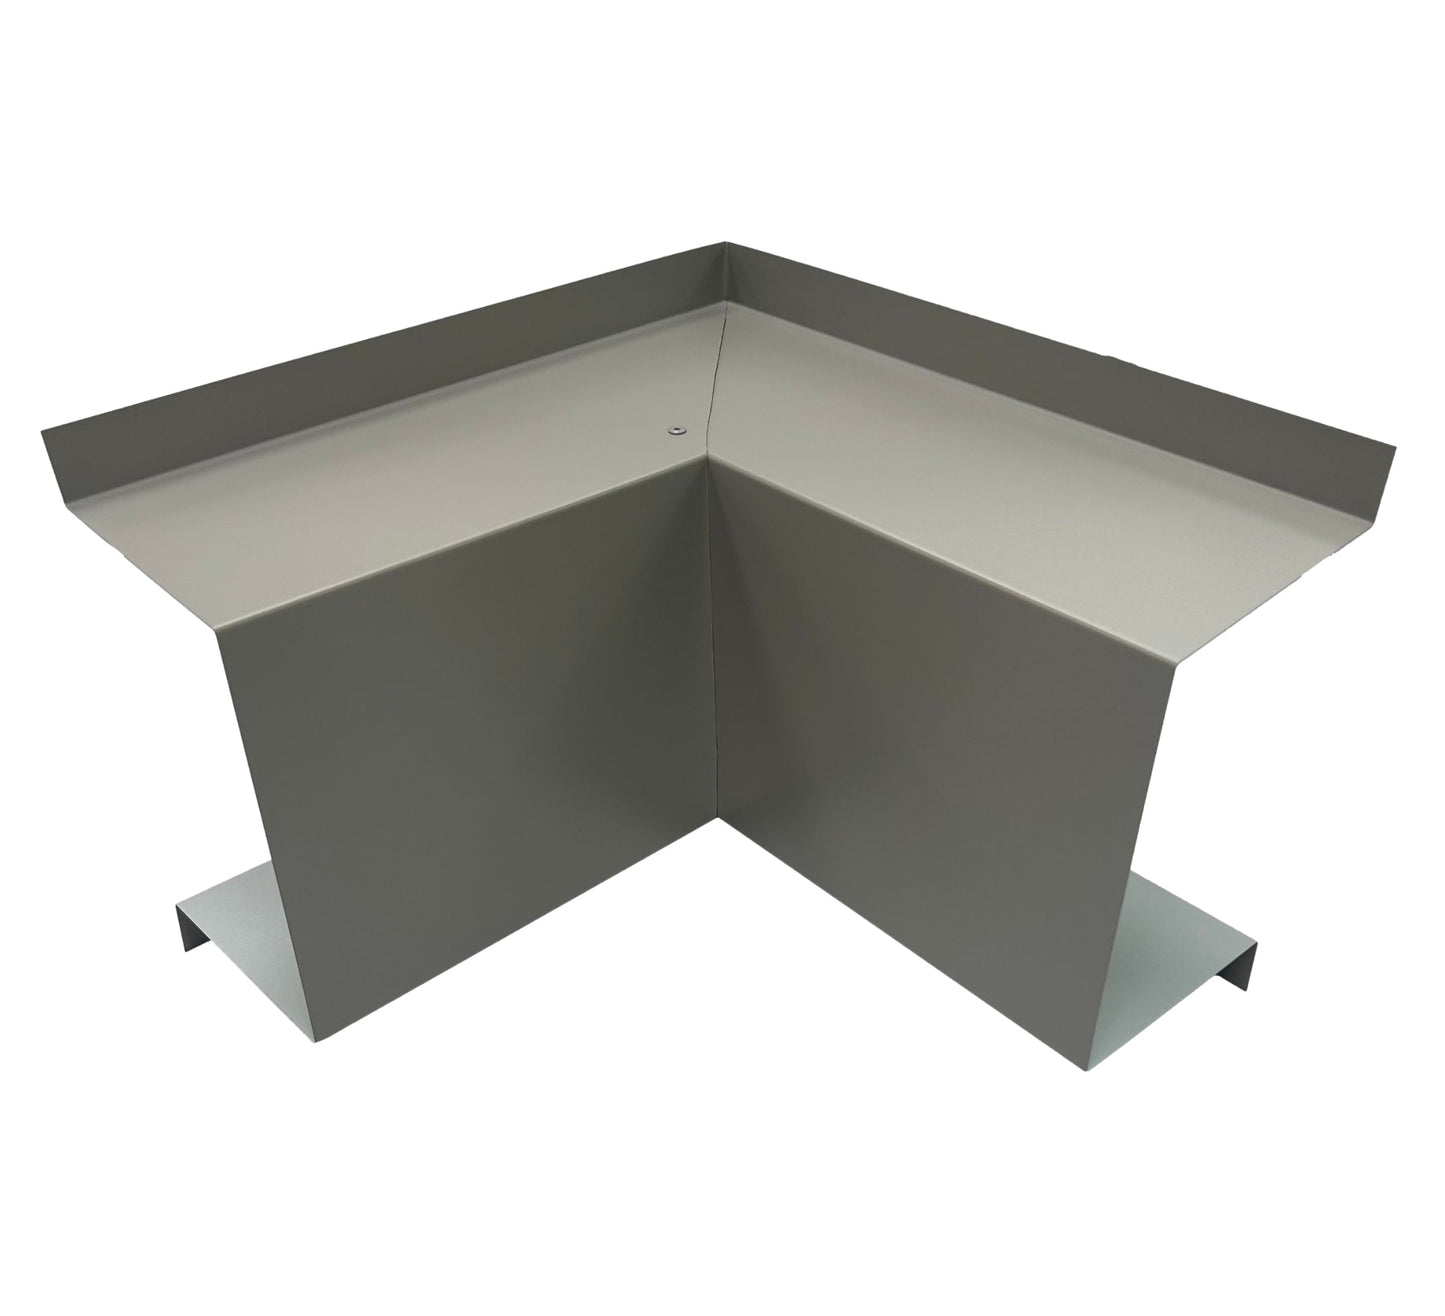 A Residential Series - Line Set Cover Inside Corner Elbows - Premium Quality by Perma Cover in a V-shaped design, used for sealing the intersection where two roof slopes meet at different angles. The gray flashing is essential for preventing water infiltration at roof junctions, much like line set covers protect HVAC installations.